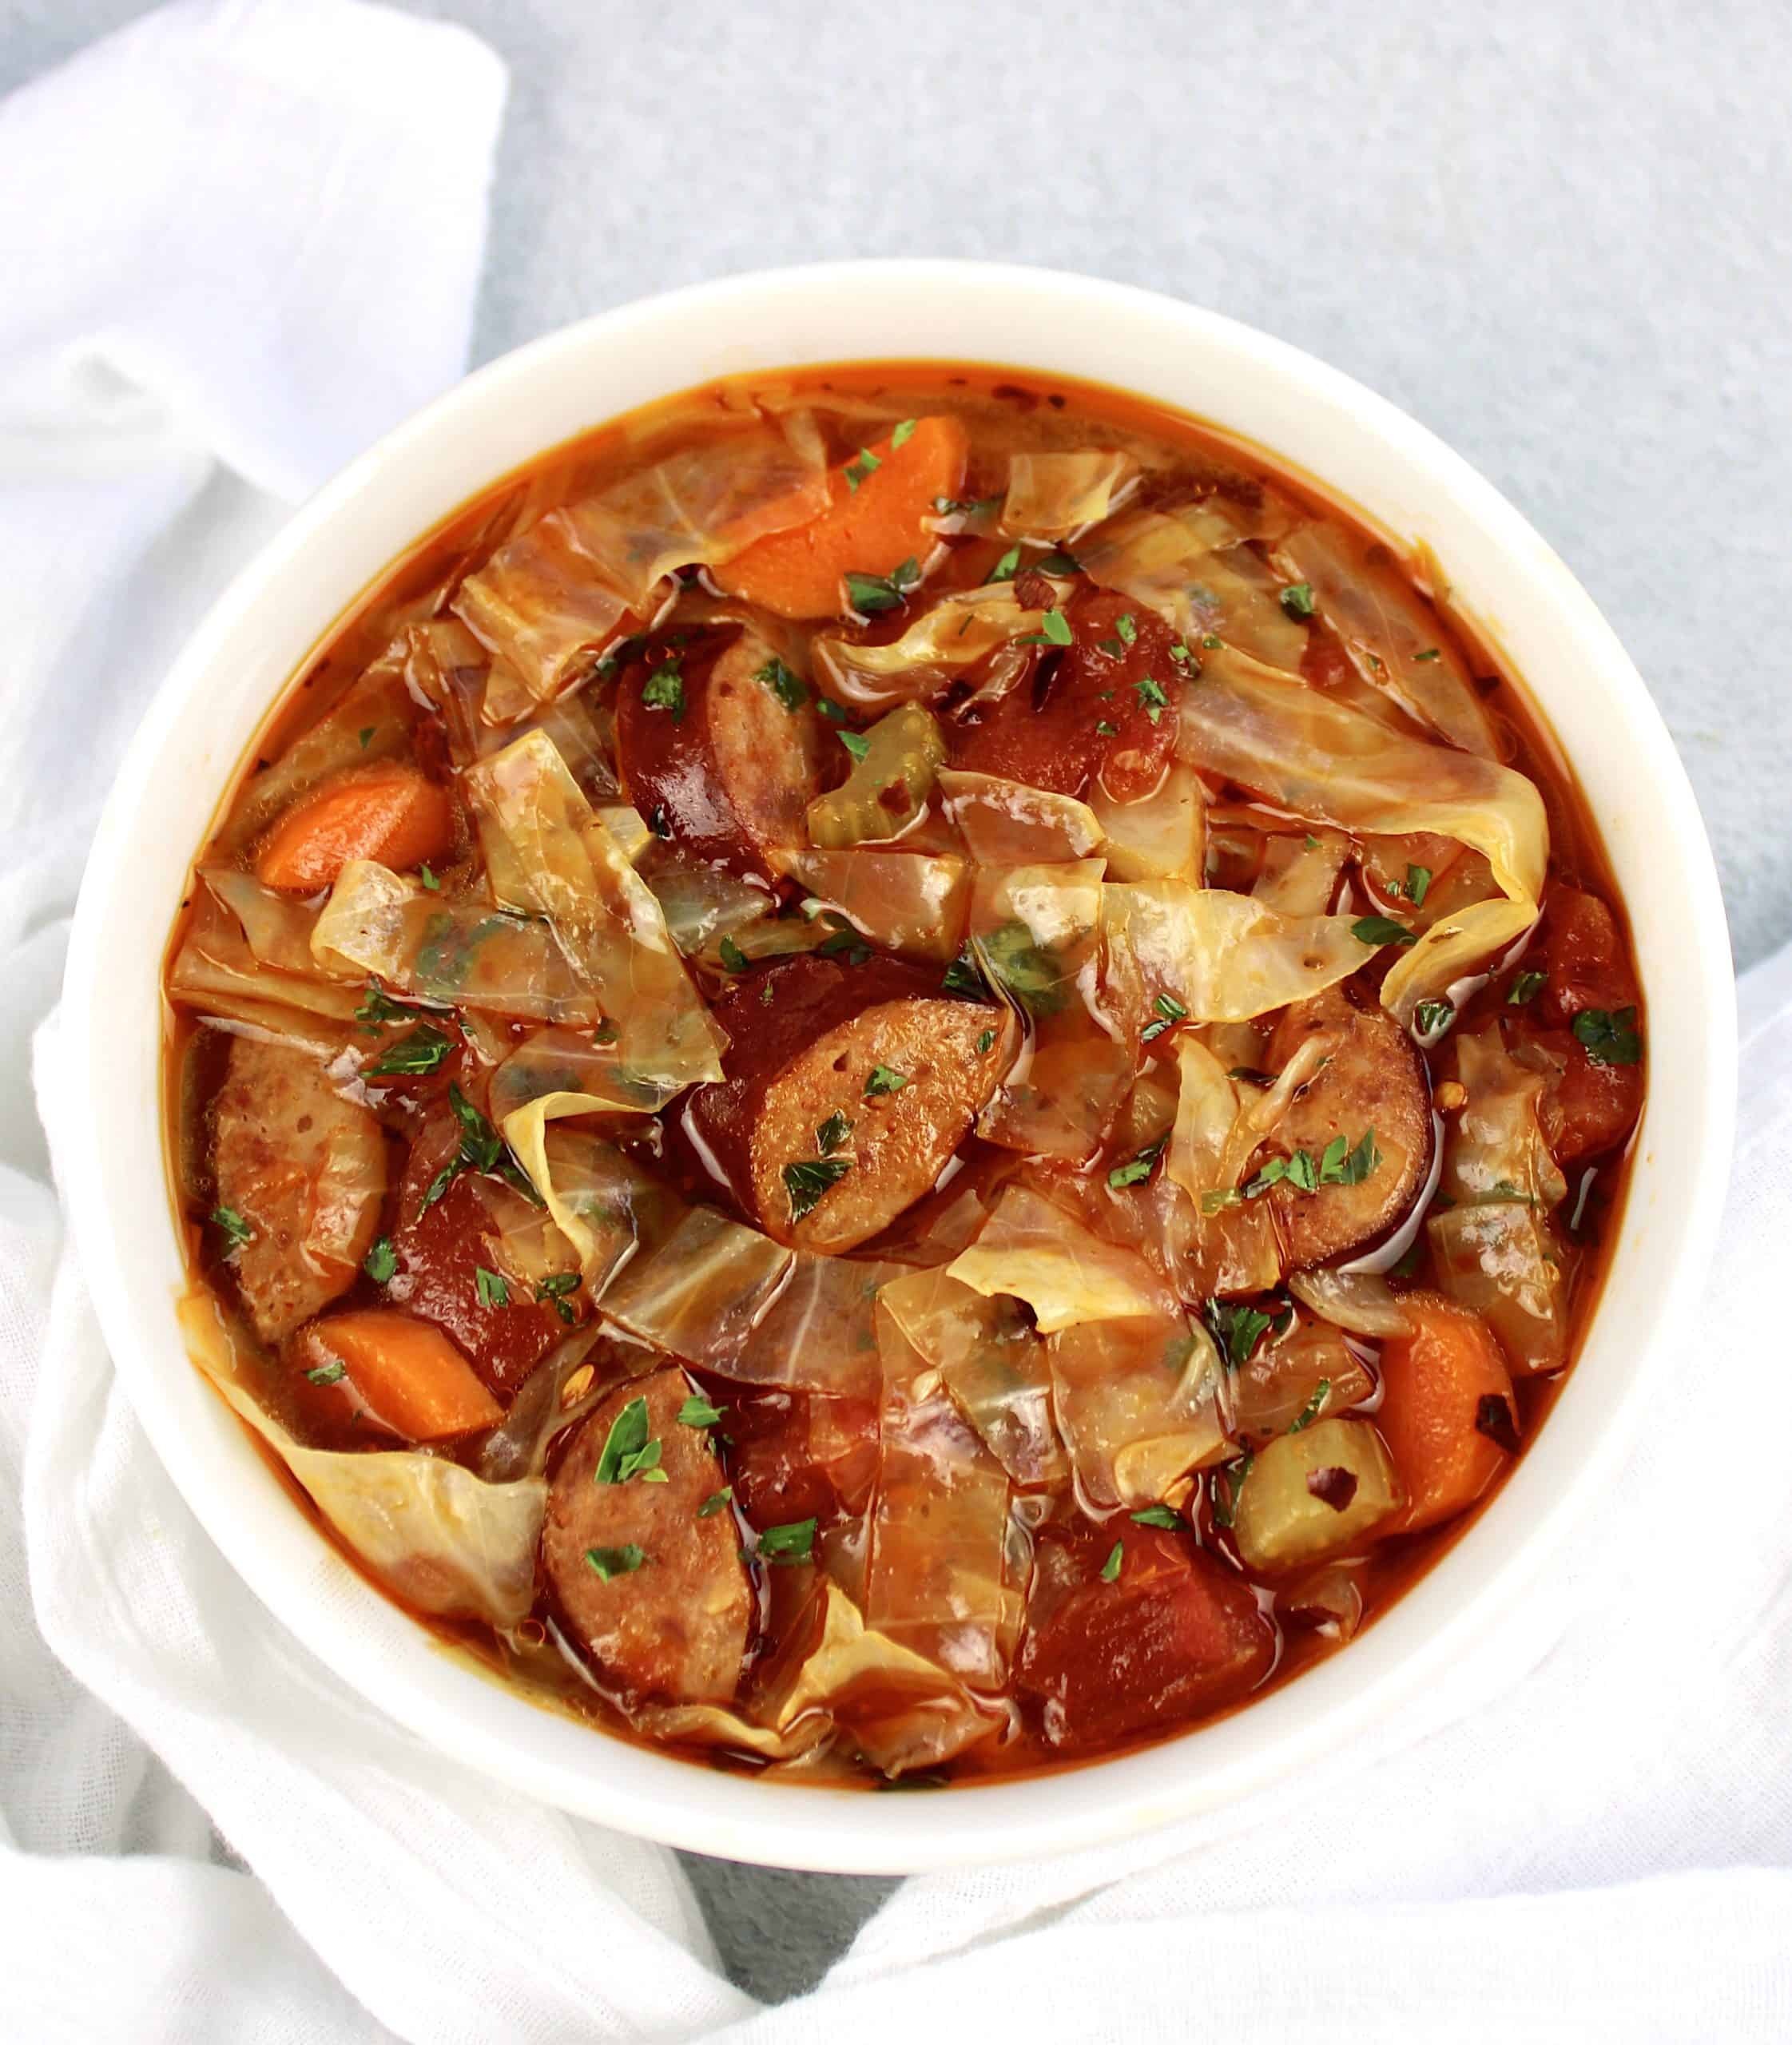 bowl of Cabbage Soup with Sausage carrots in white bowl